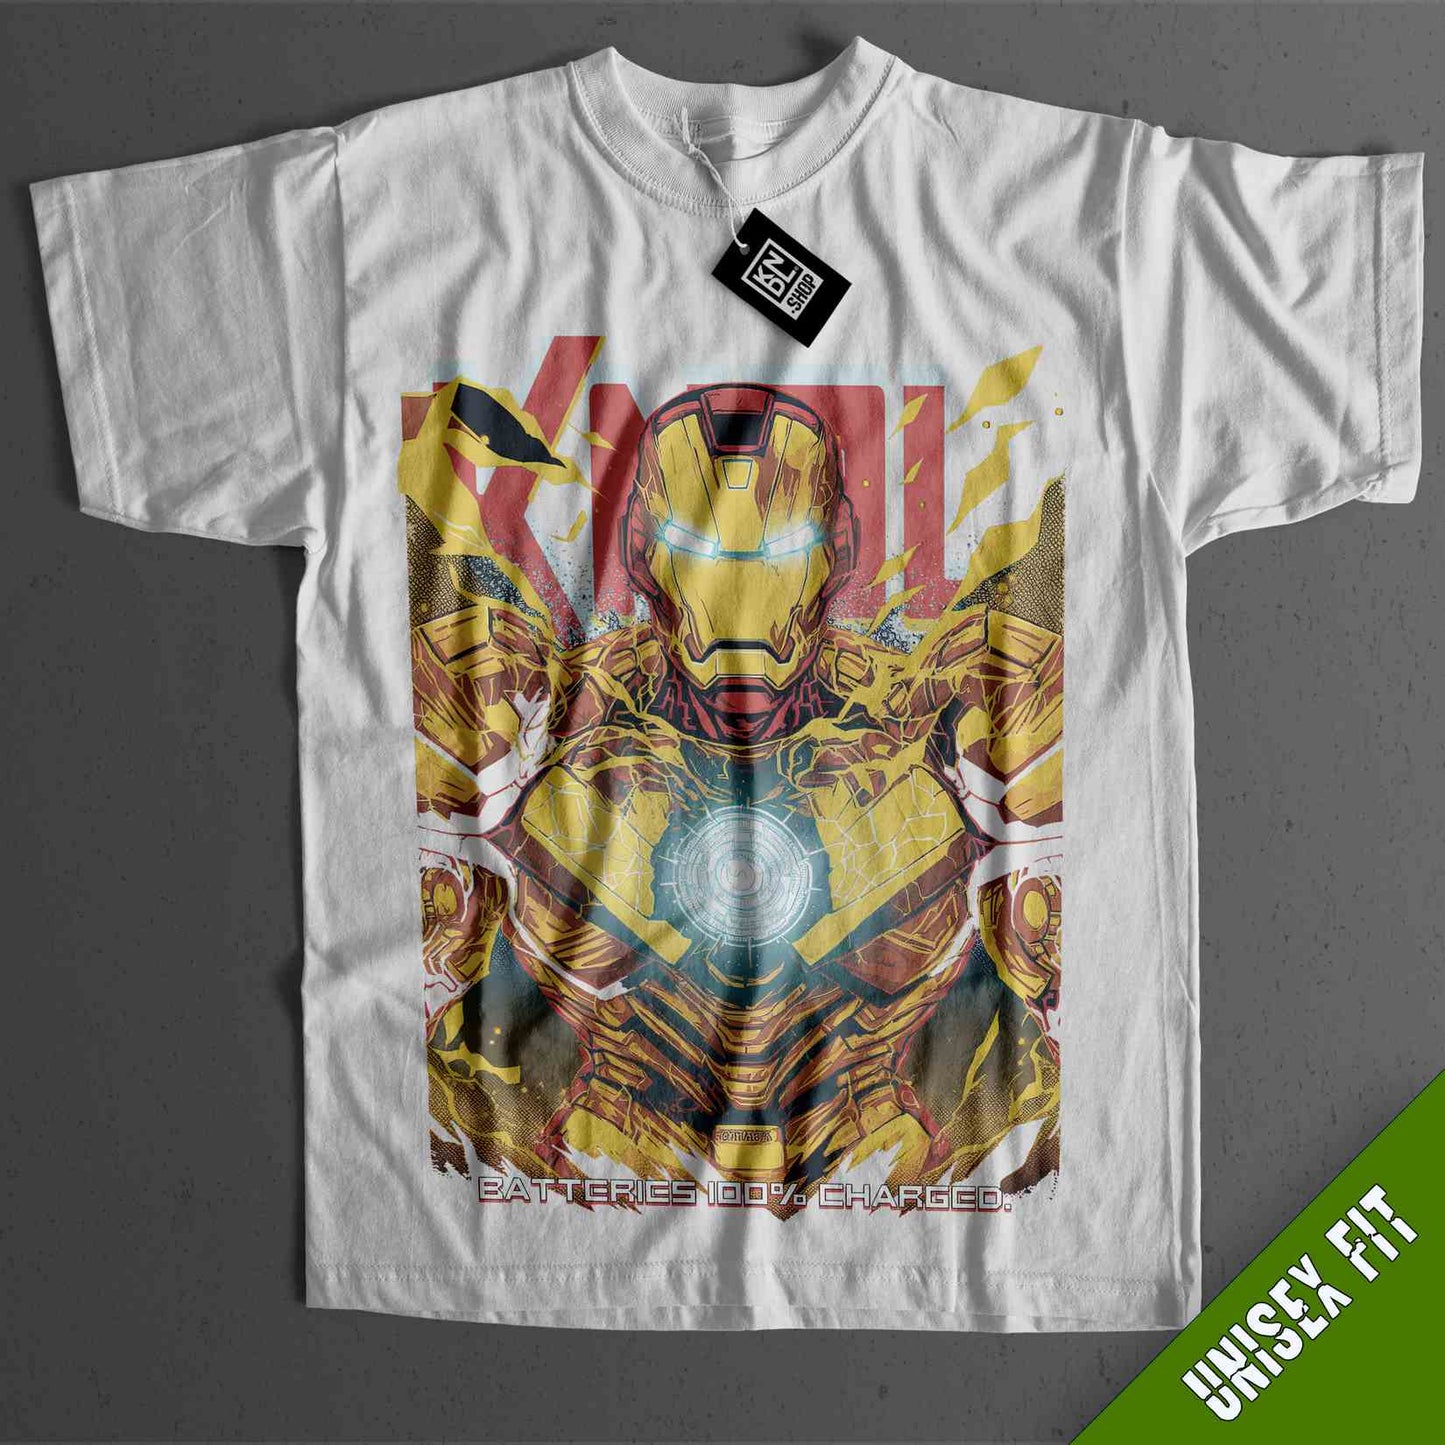 a white t - shirt with iron man on it